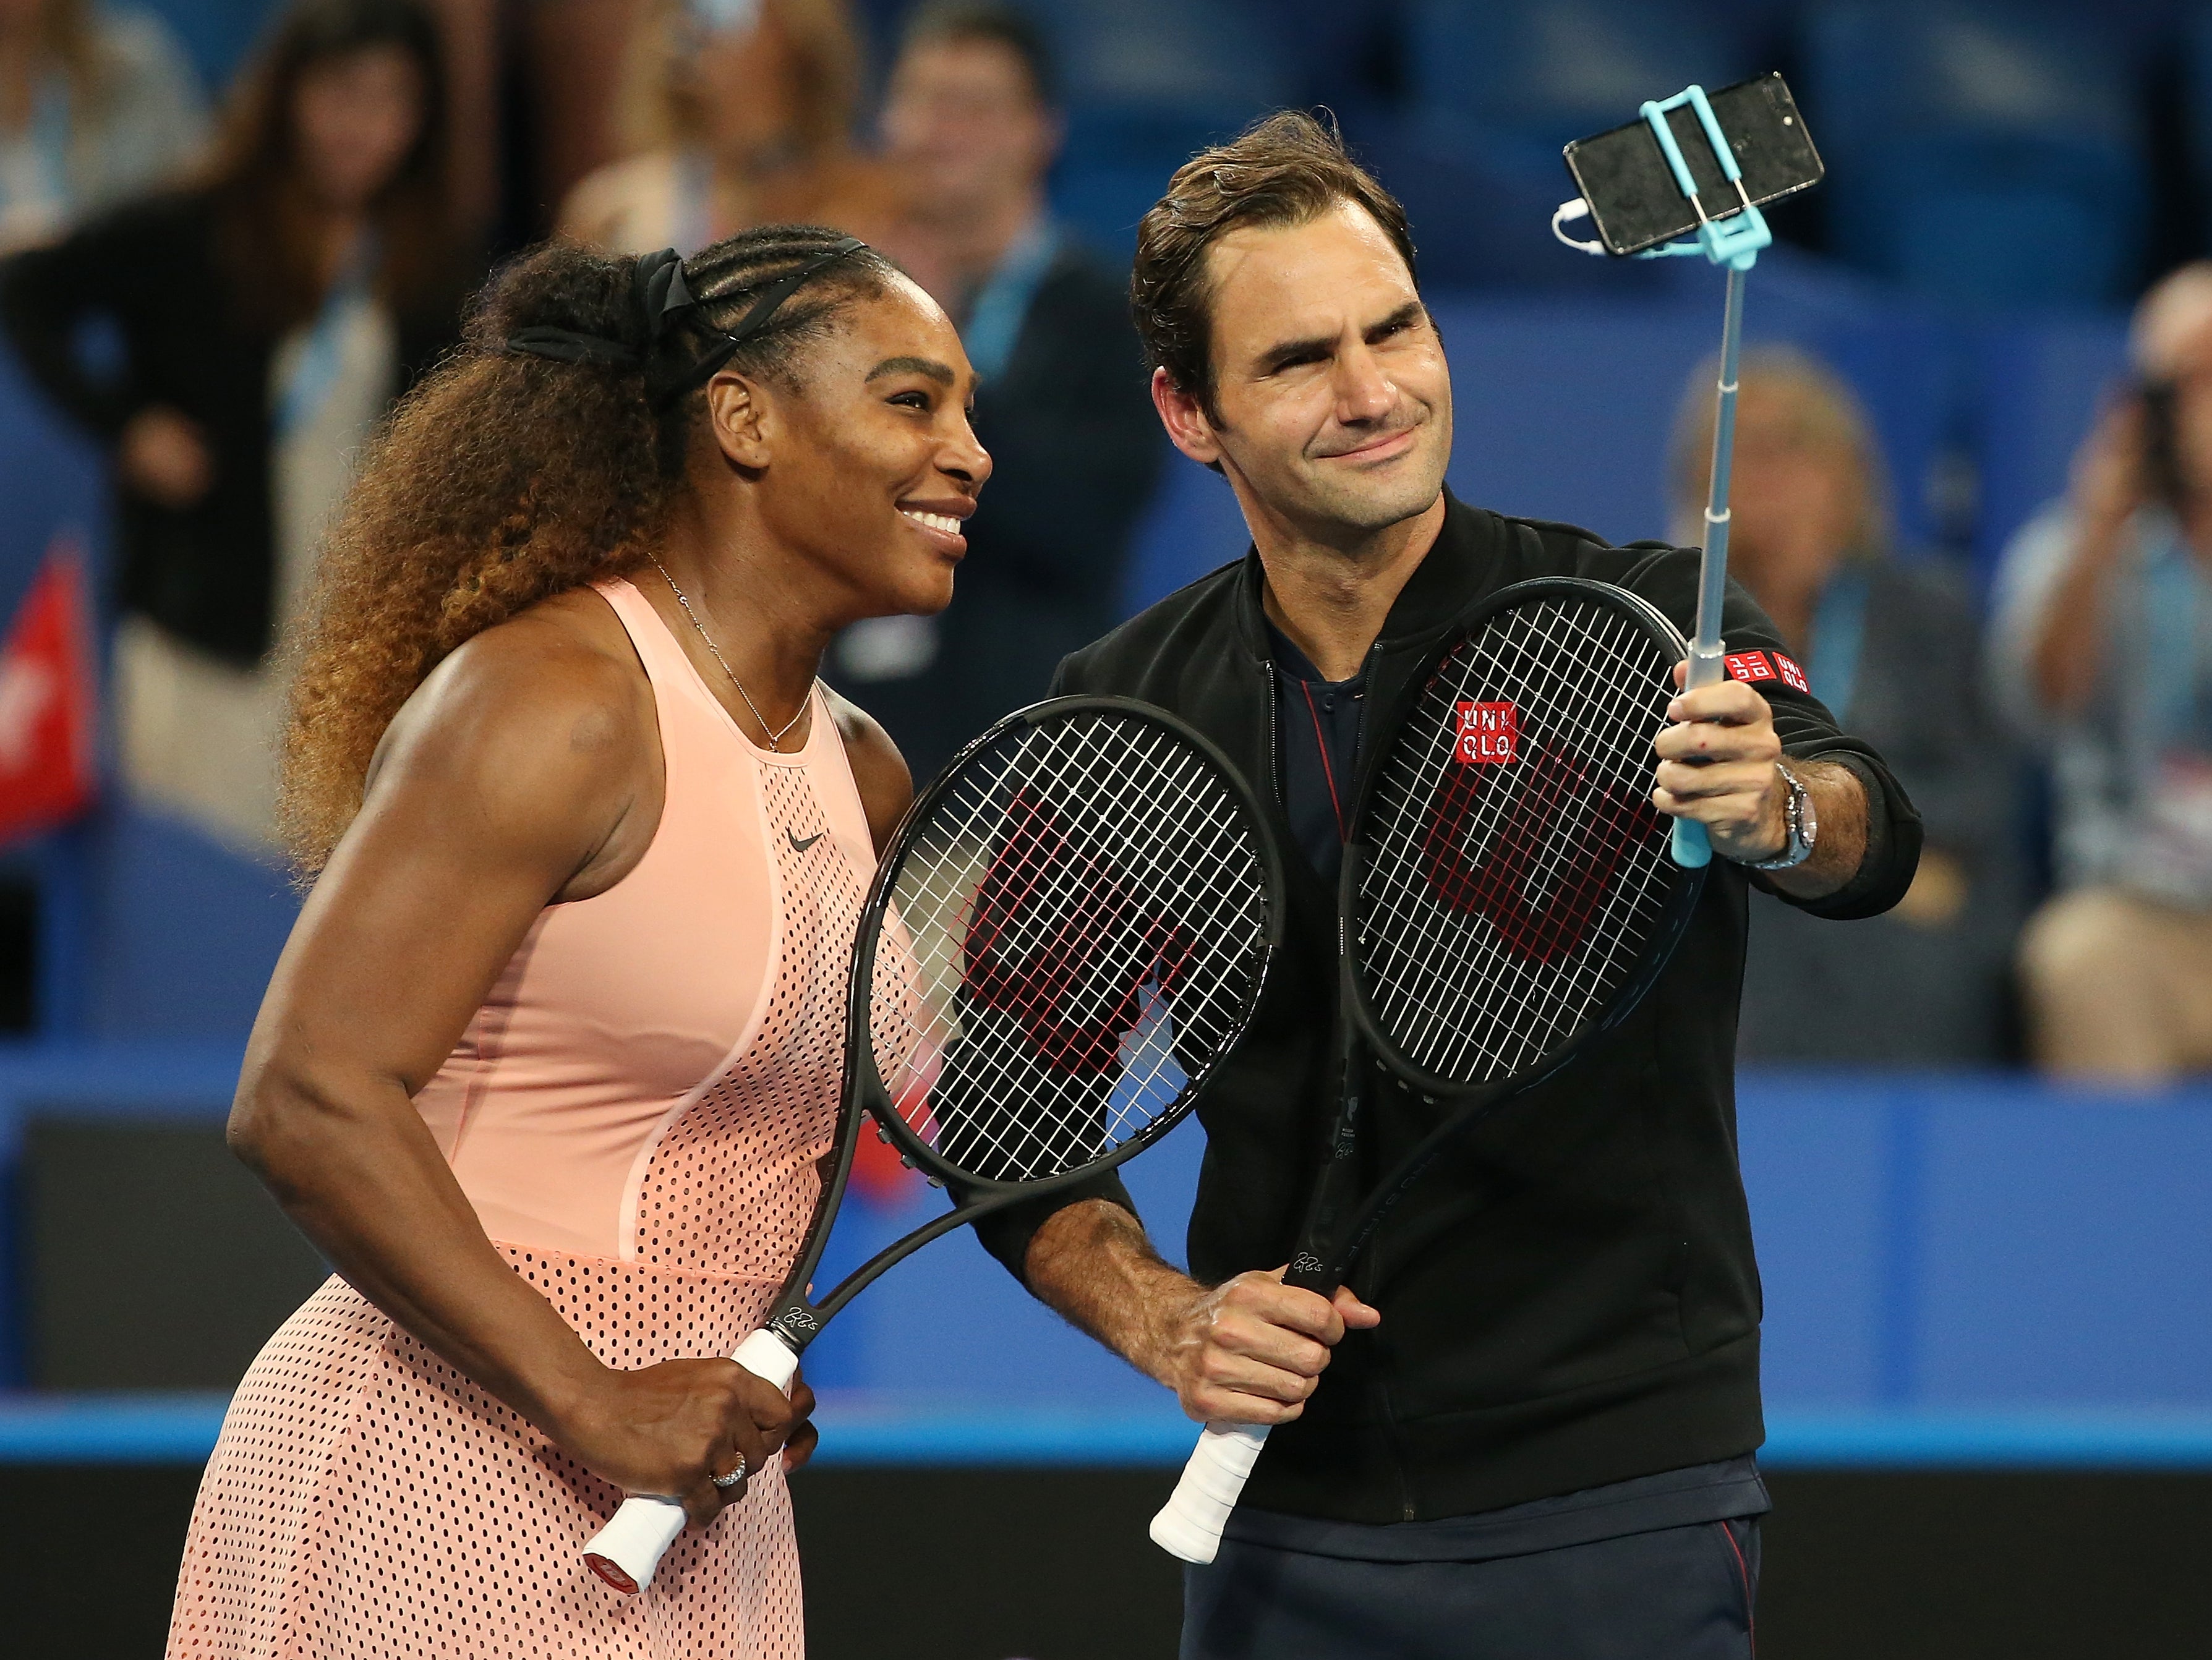 Serena Williams and Roger Federer both bowed out of tennis in 2022